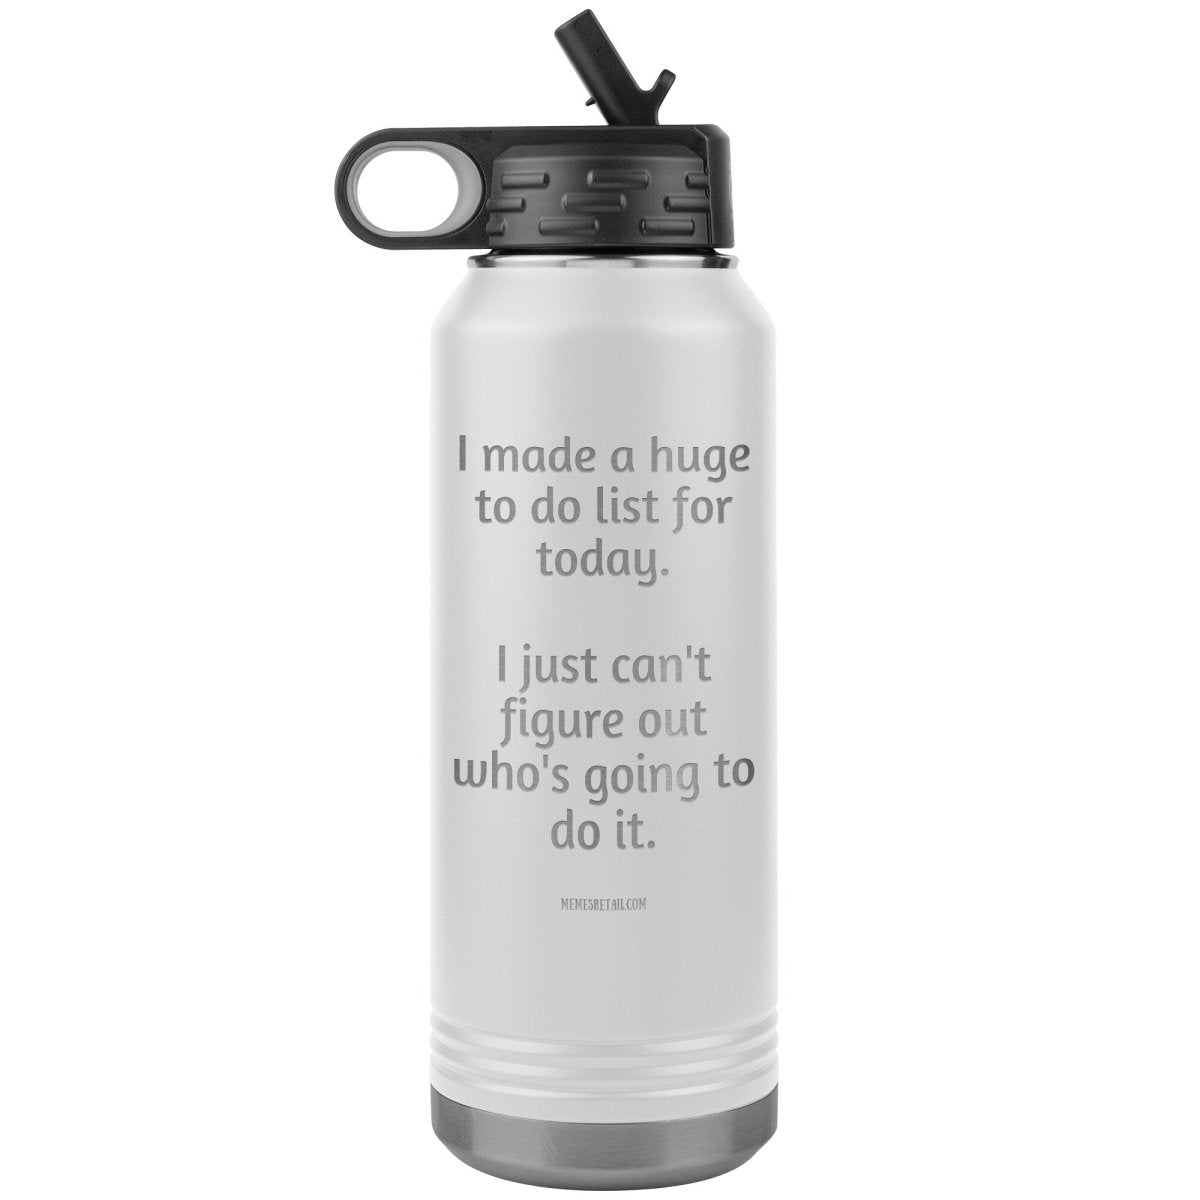 I made a huge to do list for today. I just can't figure out who's going to do it. 32 oz Water Tumbler, White - MemesRetail.com